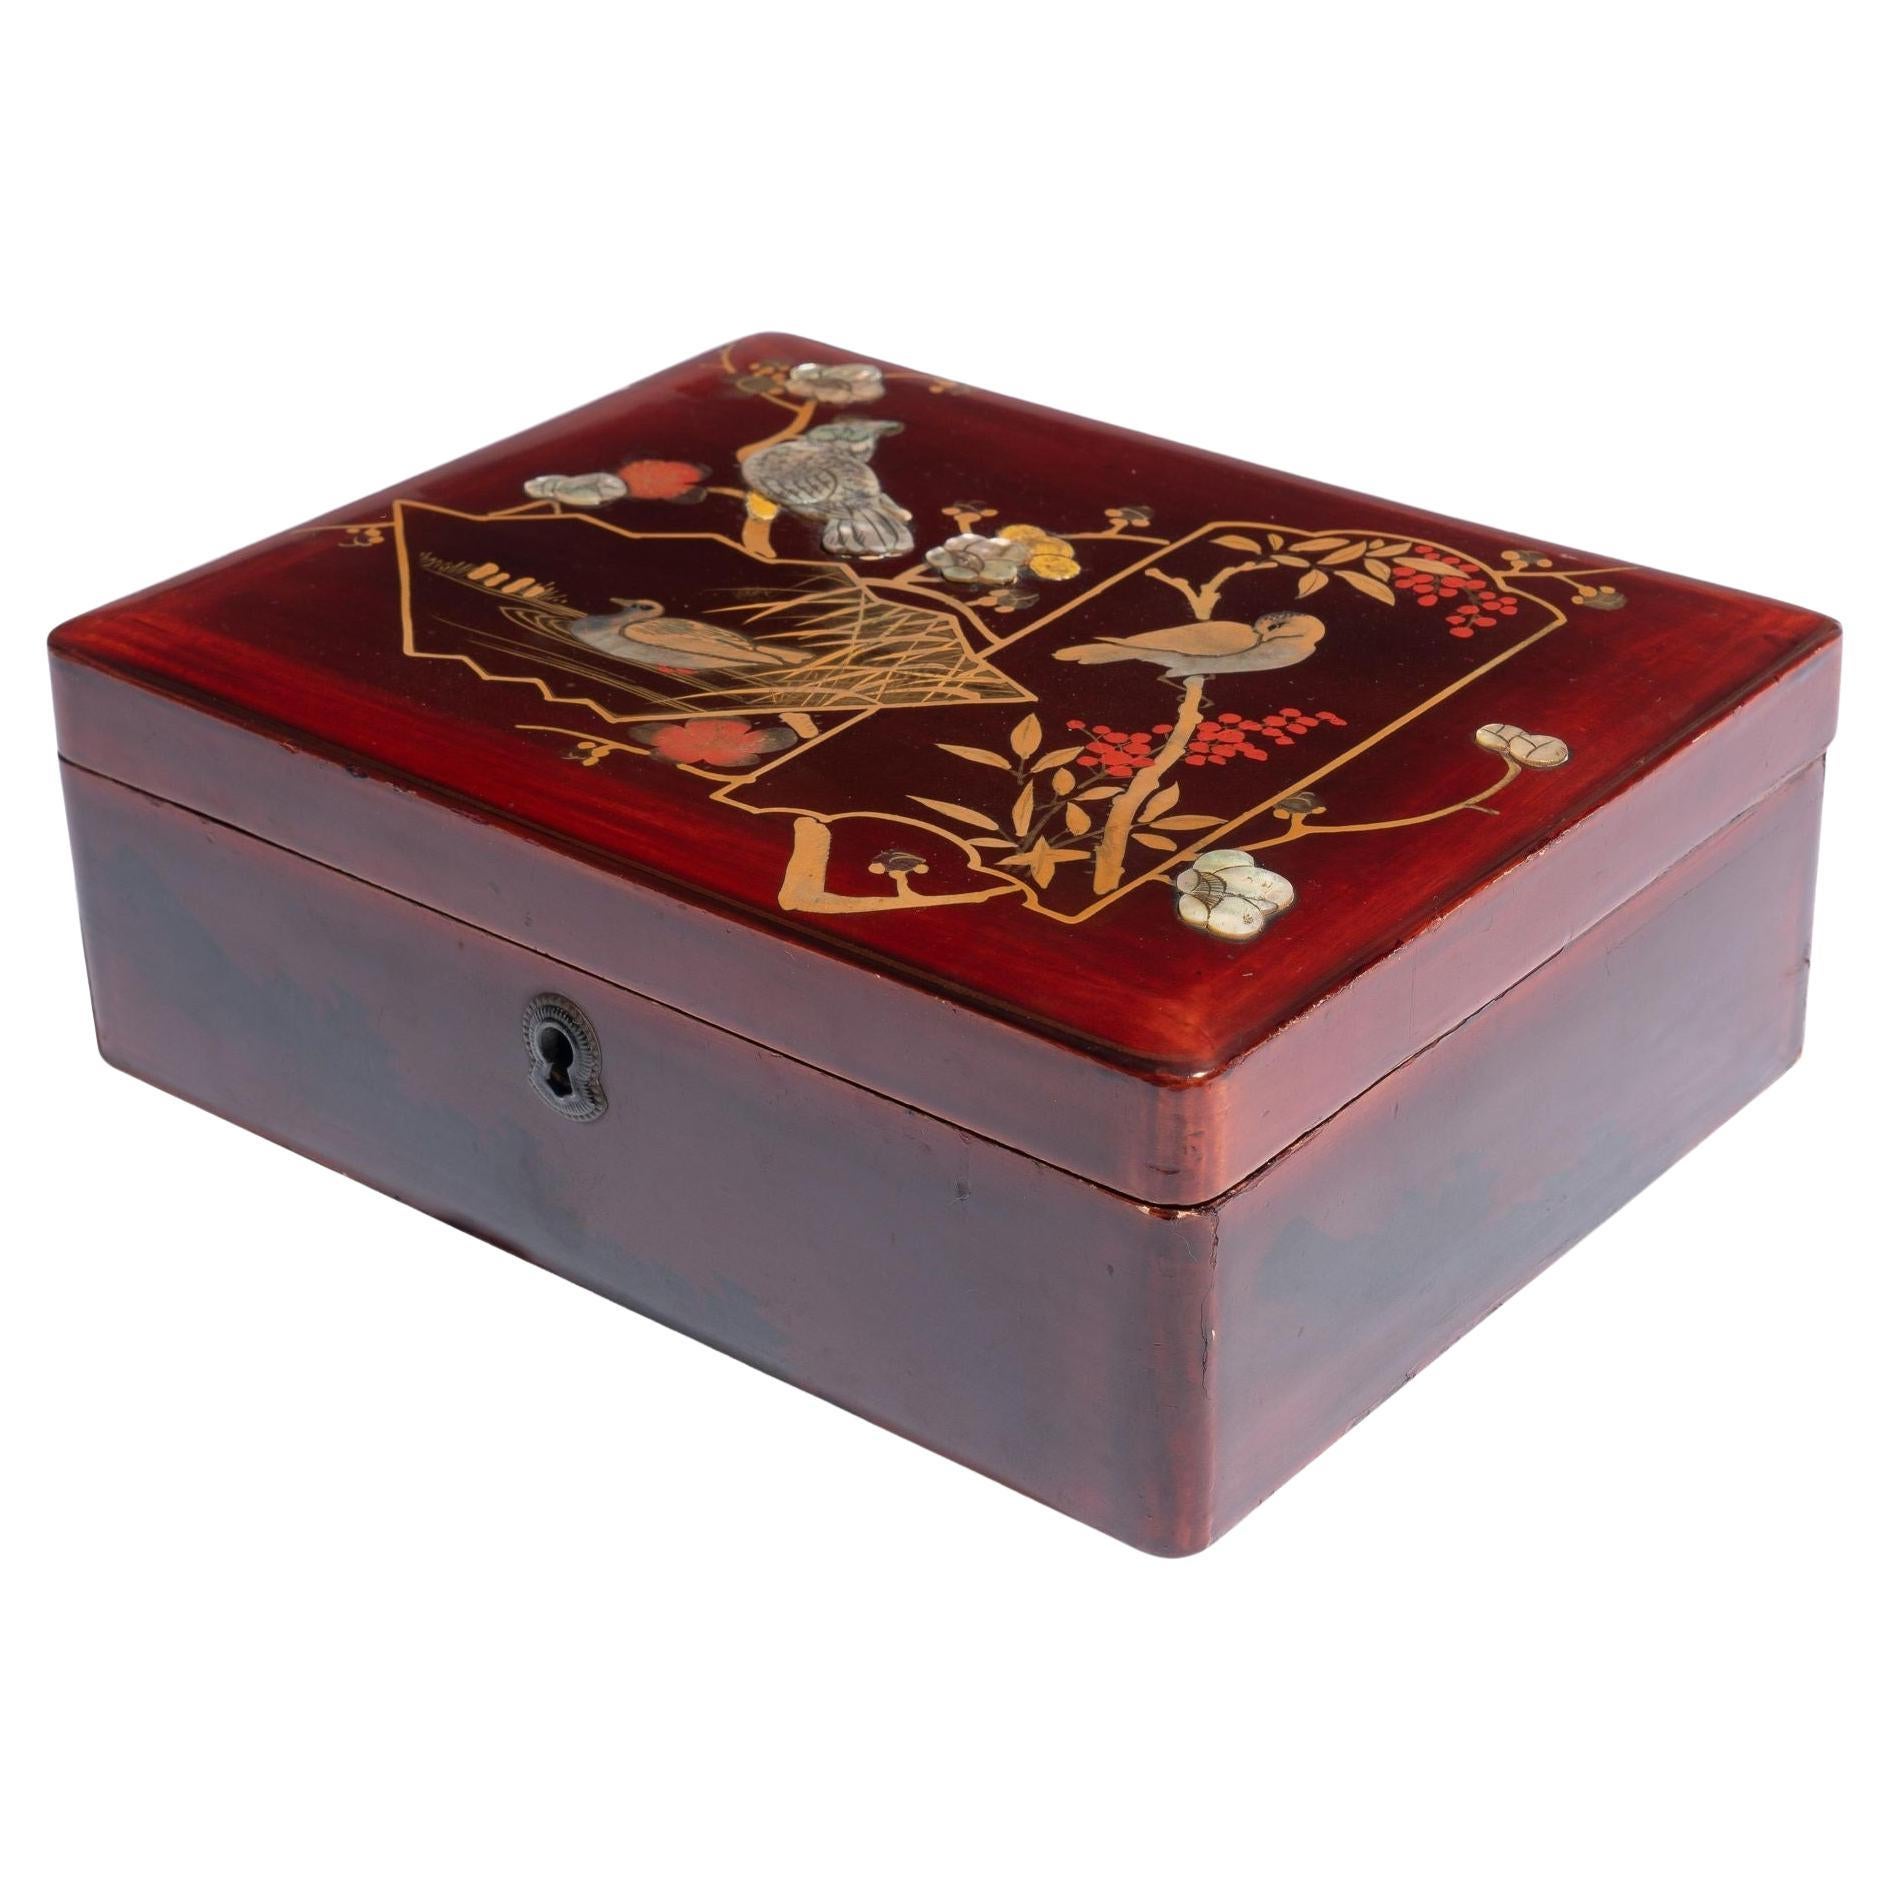 Antique Japanese Lacquered, Enameled, and Inlaid Box With Hinged Lid, c. 1800's